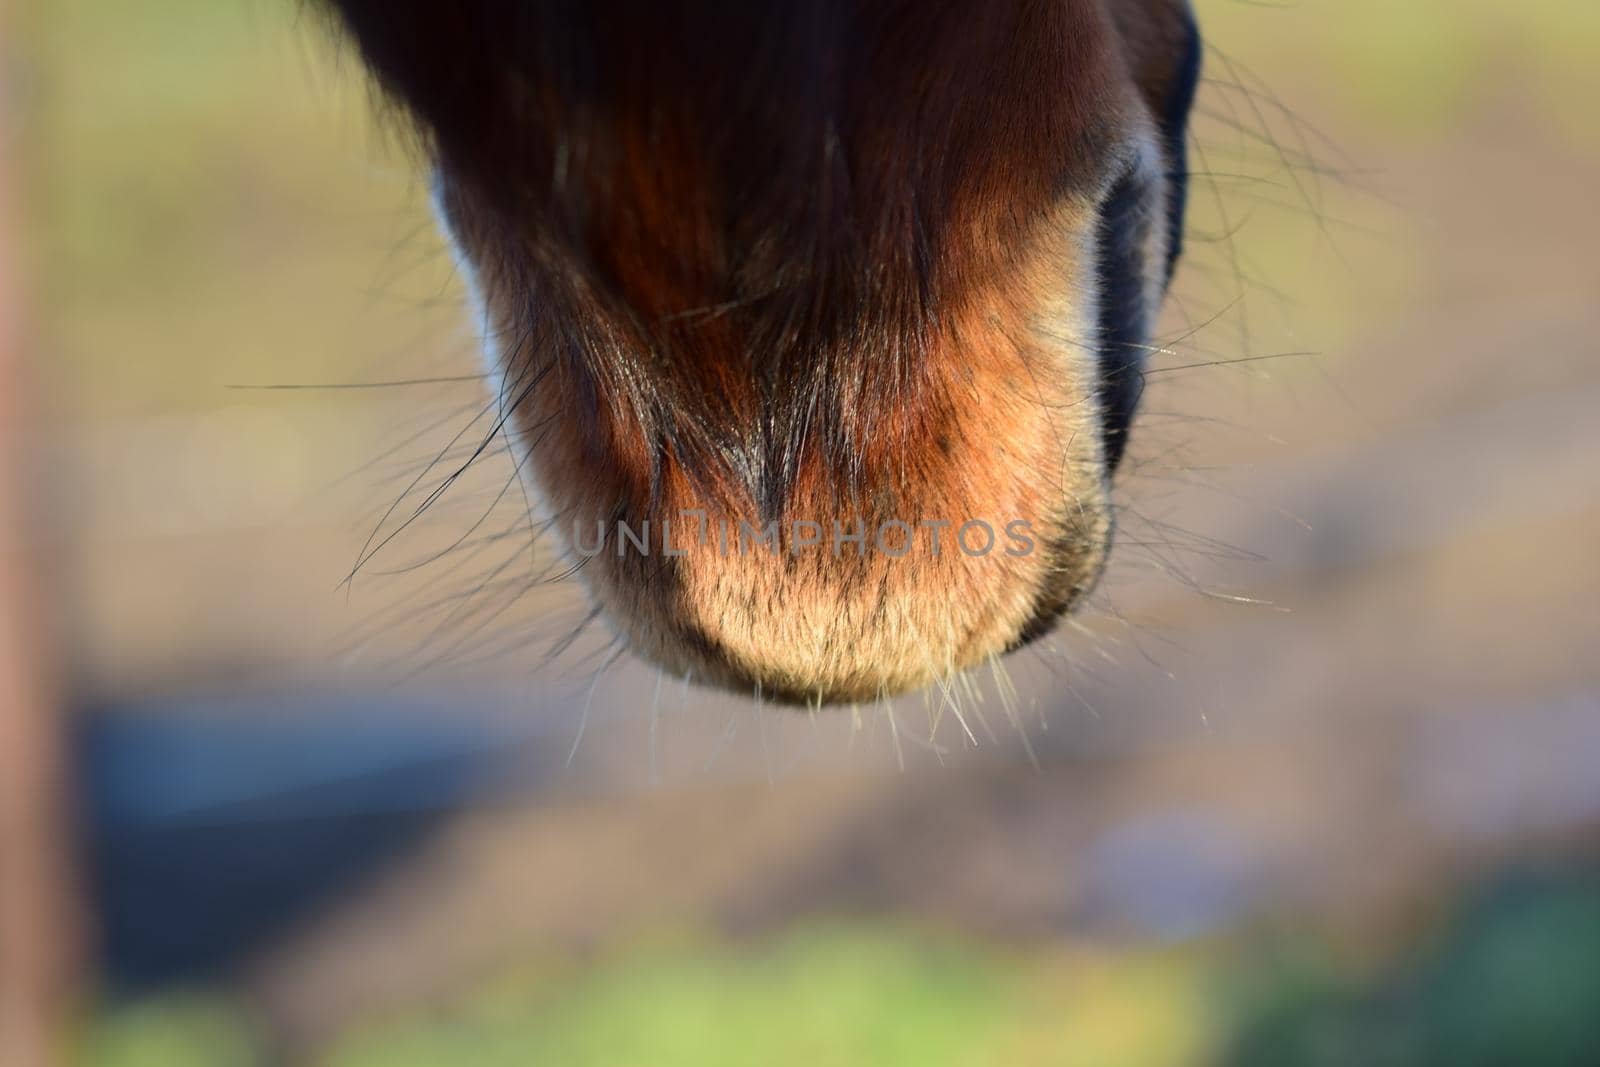 Close-up of a horses mouth from behind against a blurry background